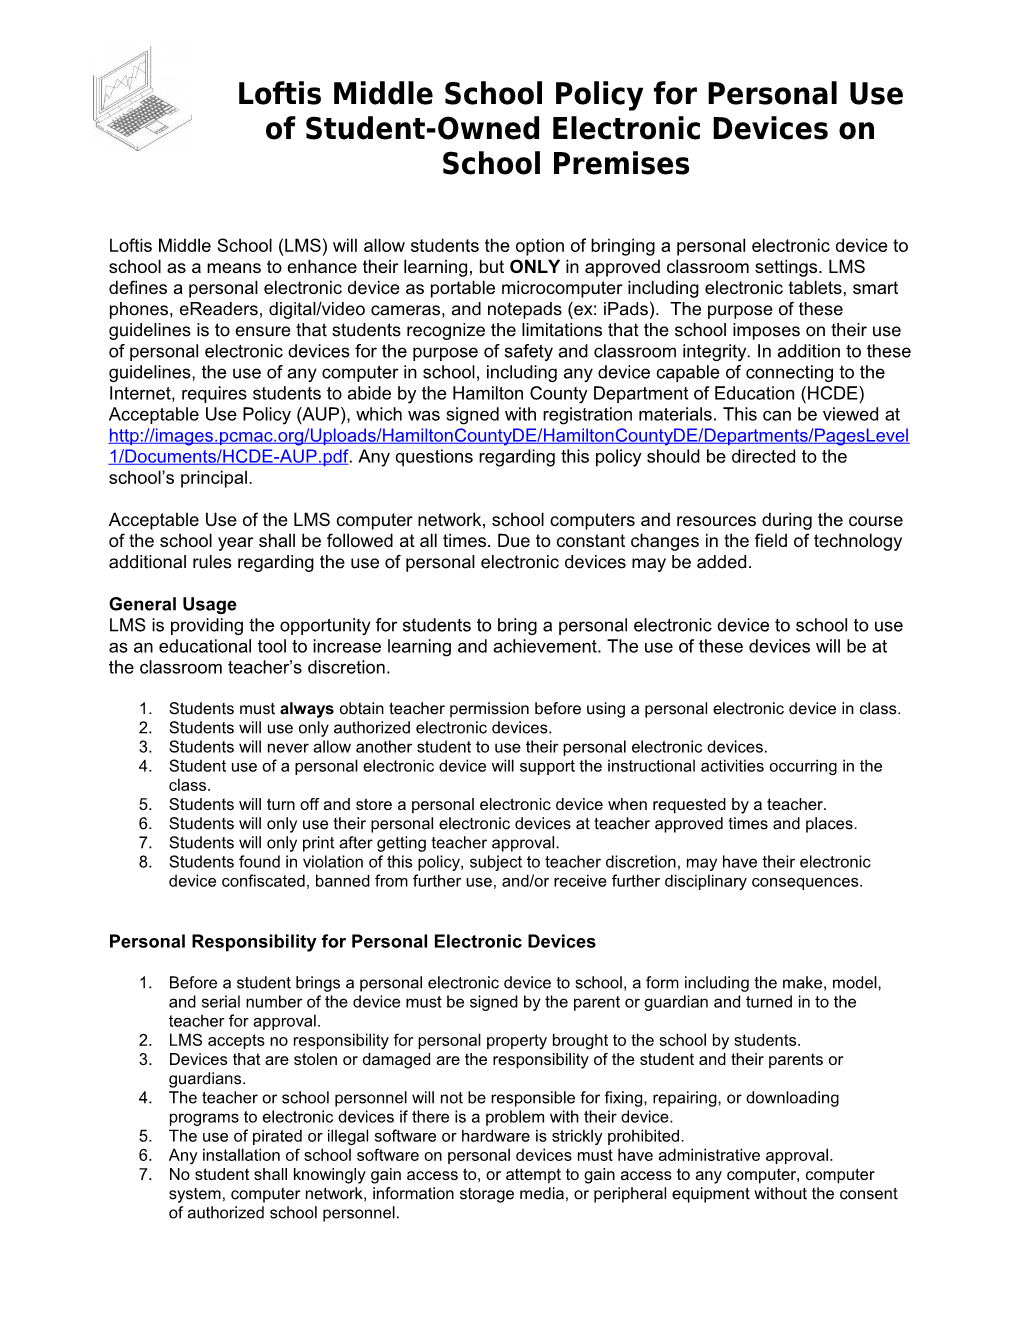 Ooltewah Middle School Policy for Personal Use of Student-Owned Laptops on School Premises